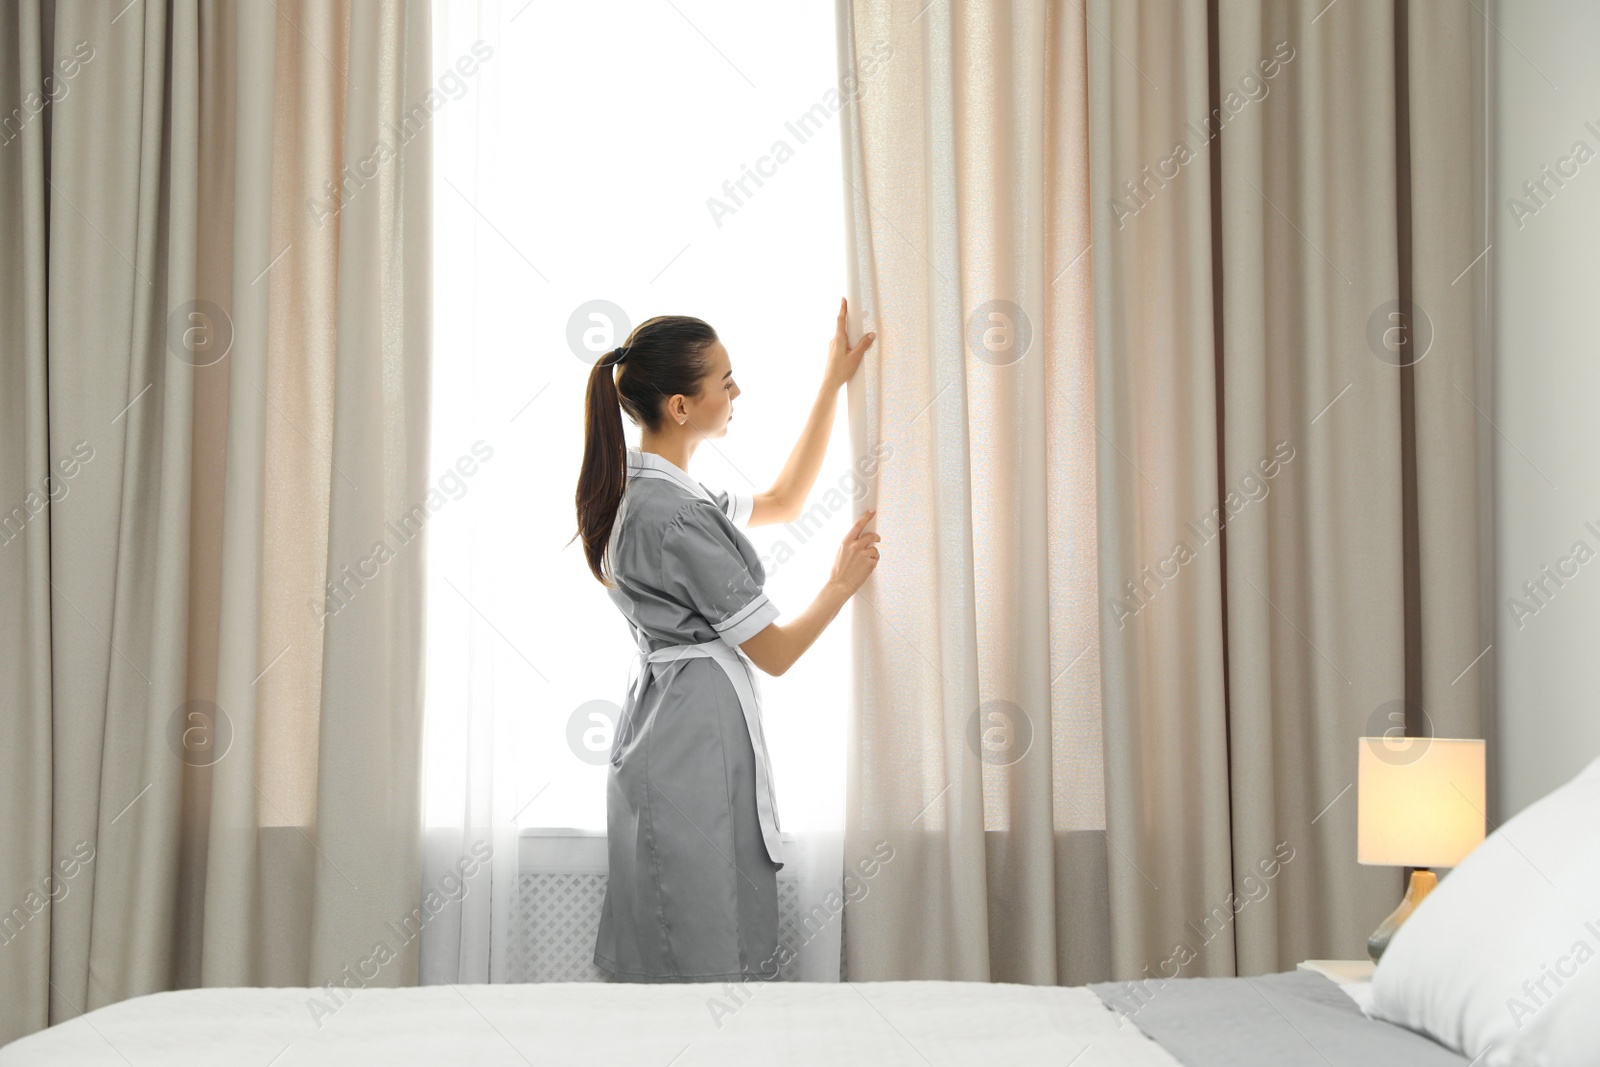 Photo of Chambermaid adjusting curtains in room. Hotel service